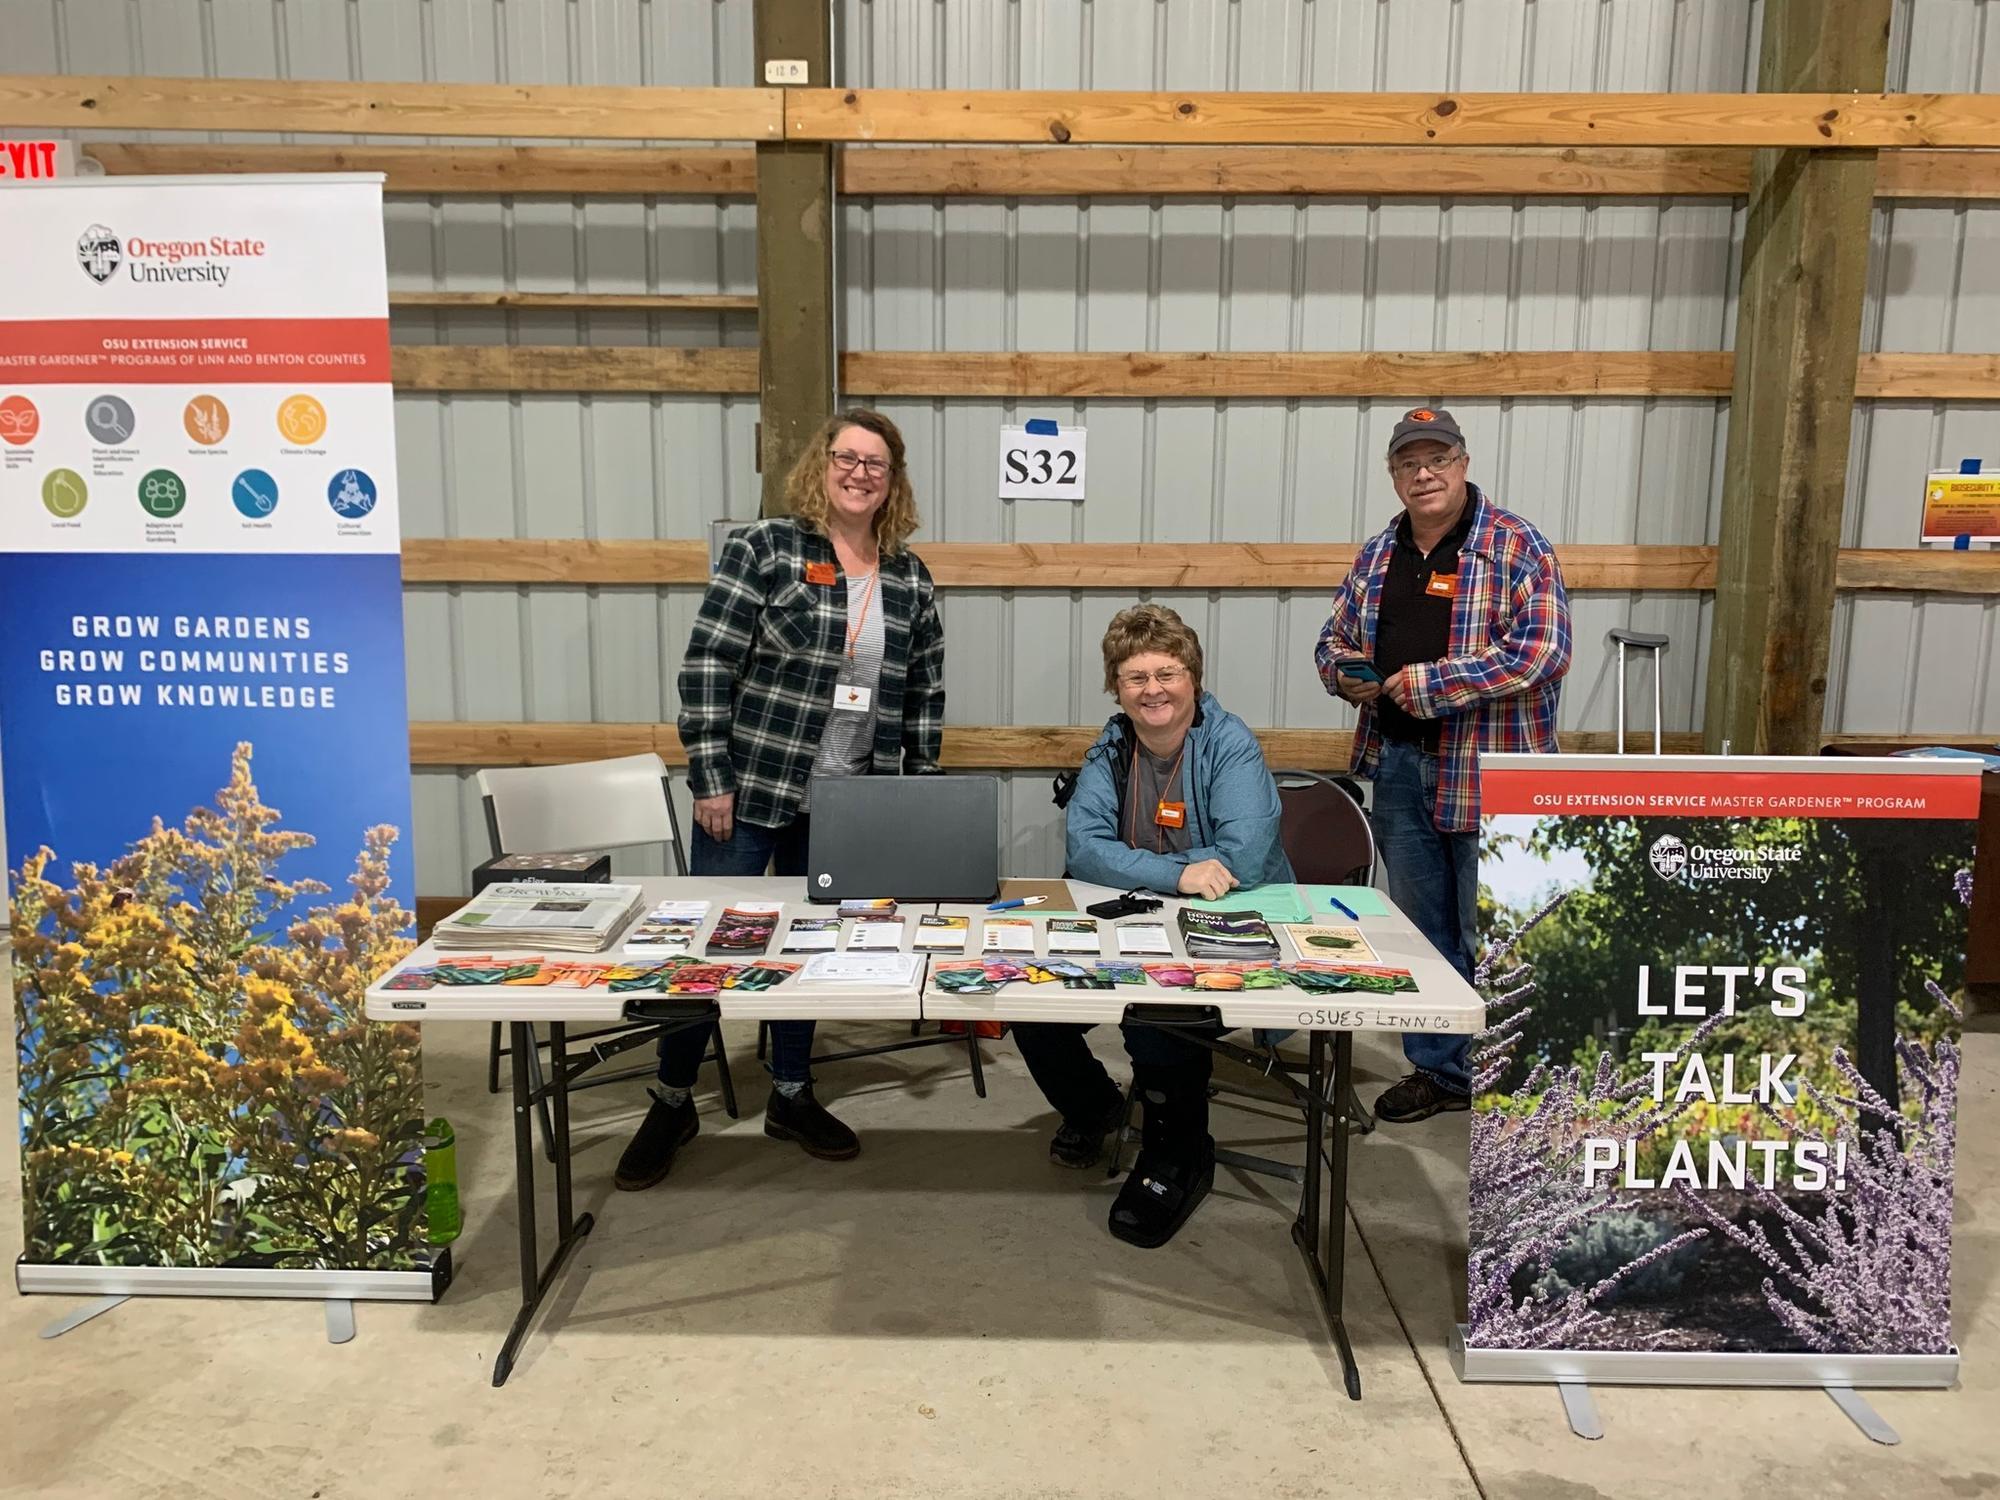 Master Gardeners tabling at an event